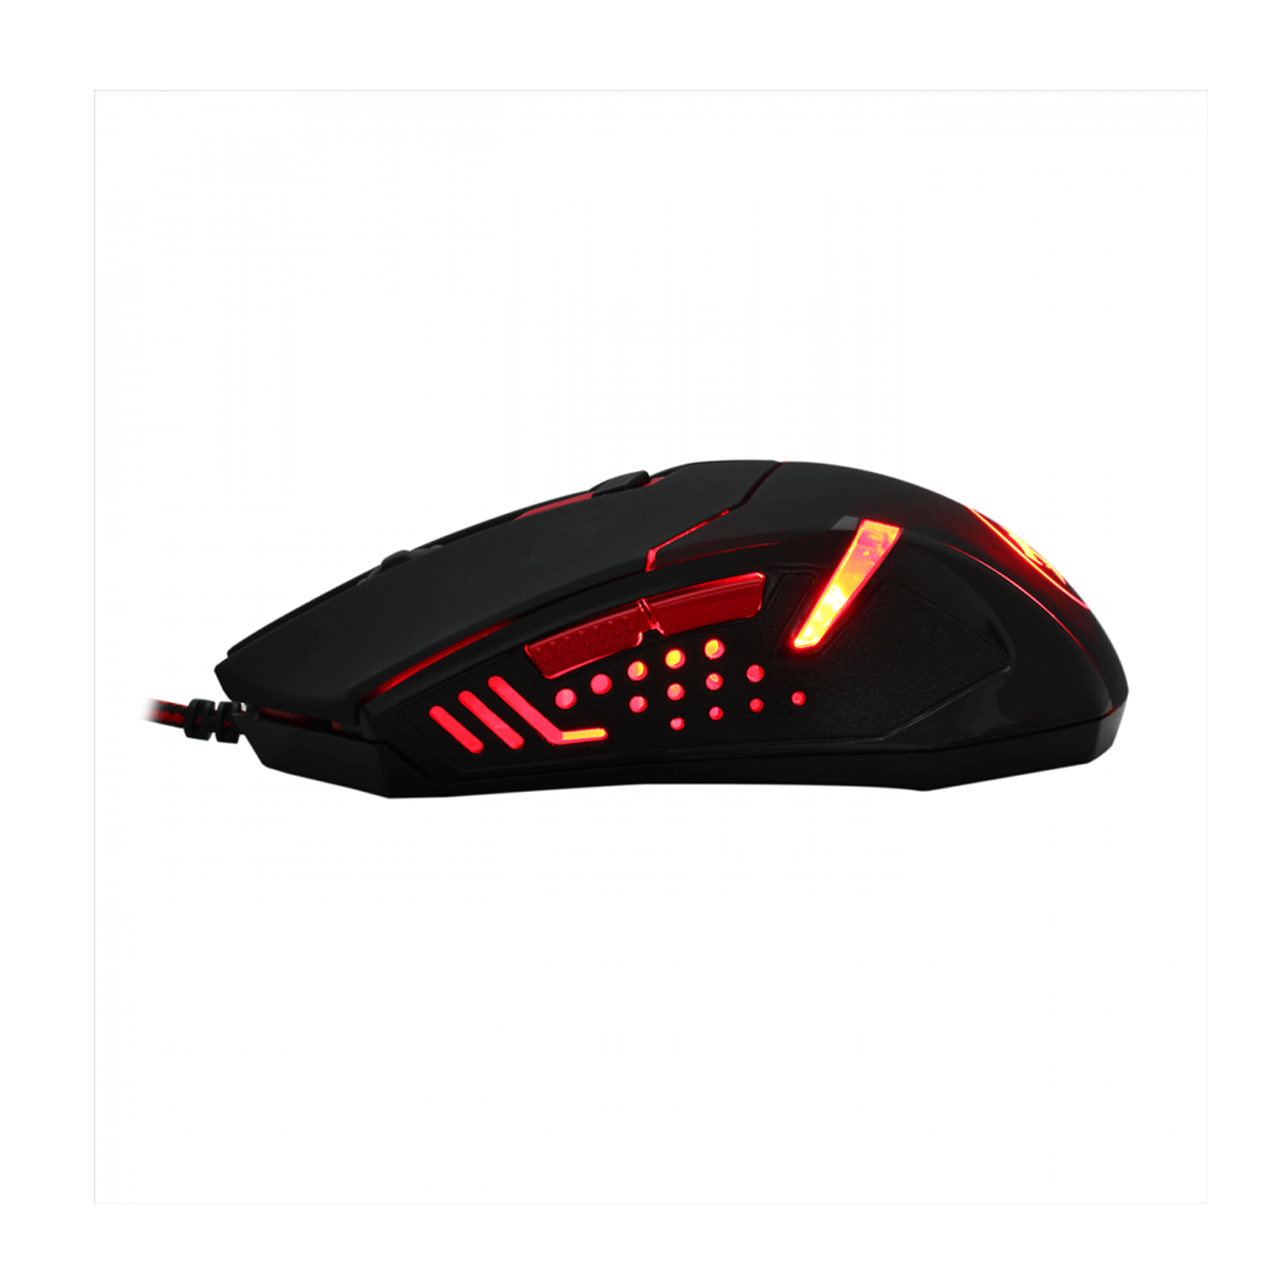 Centrophorus-M601-3-5-gaming-mouse